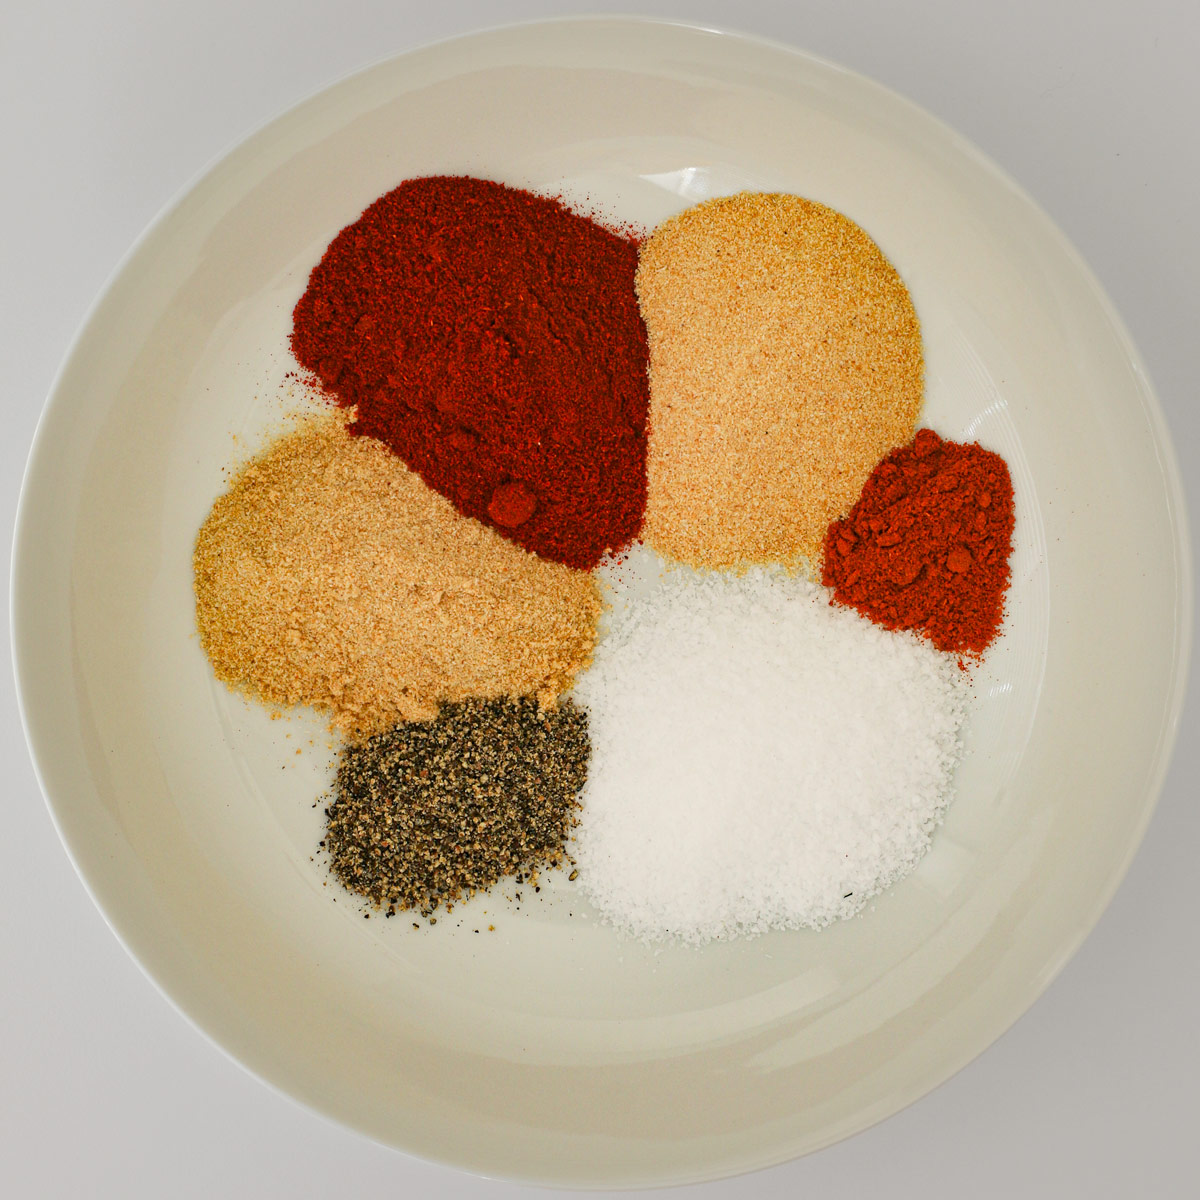 all the spices in a small plate in piles.